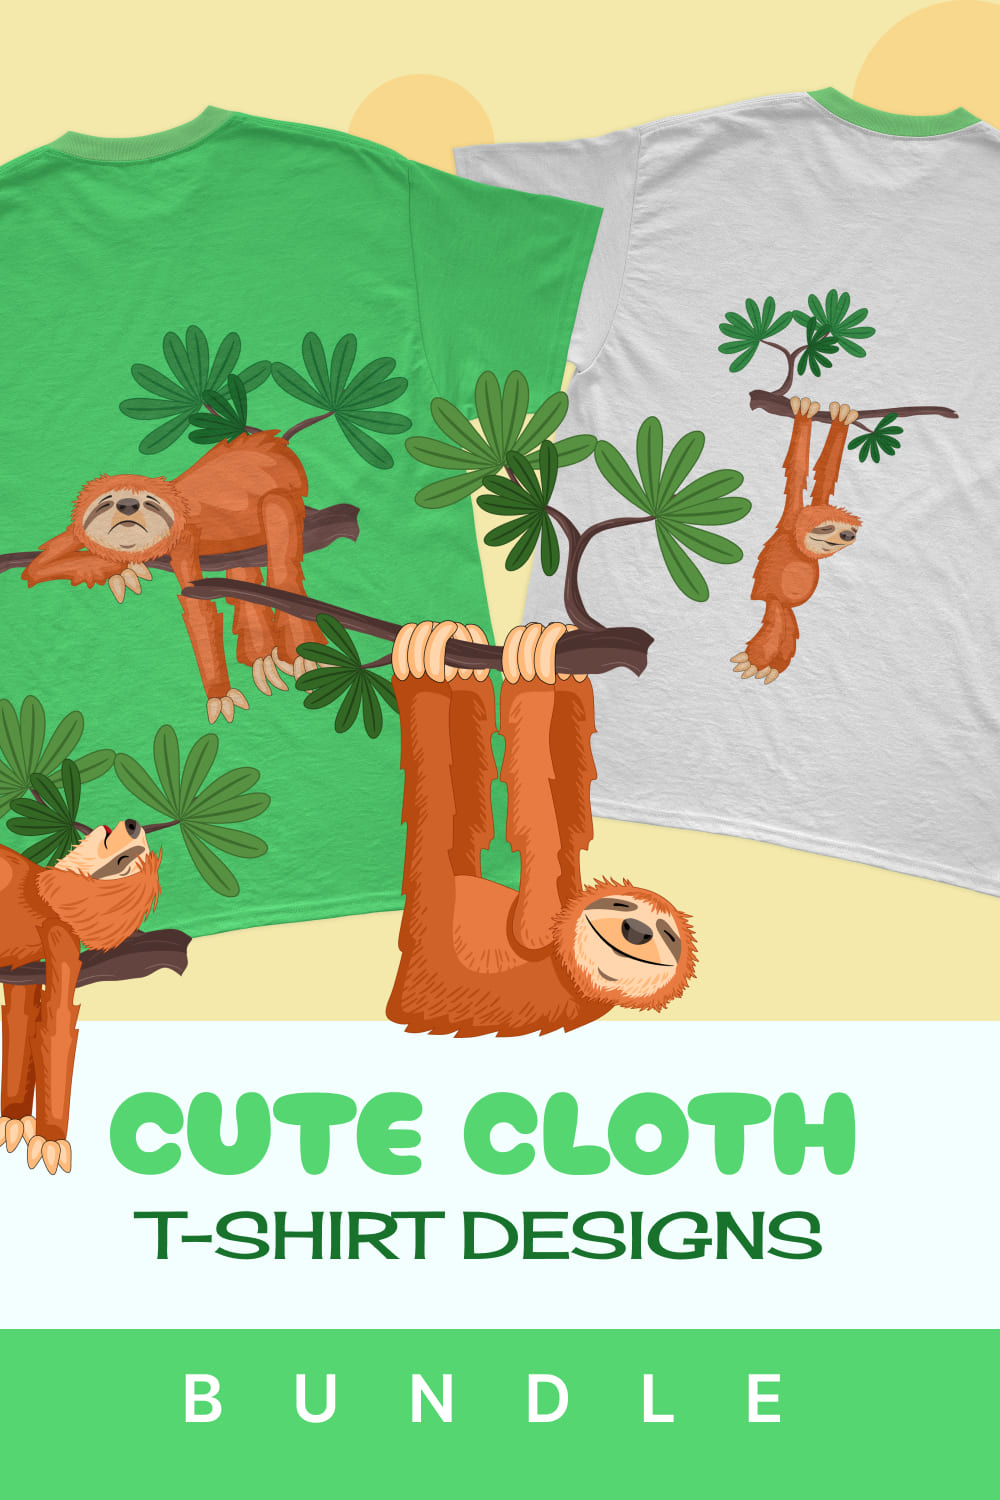 A pack of t-shirts with an irresistible sloth print on wood.